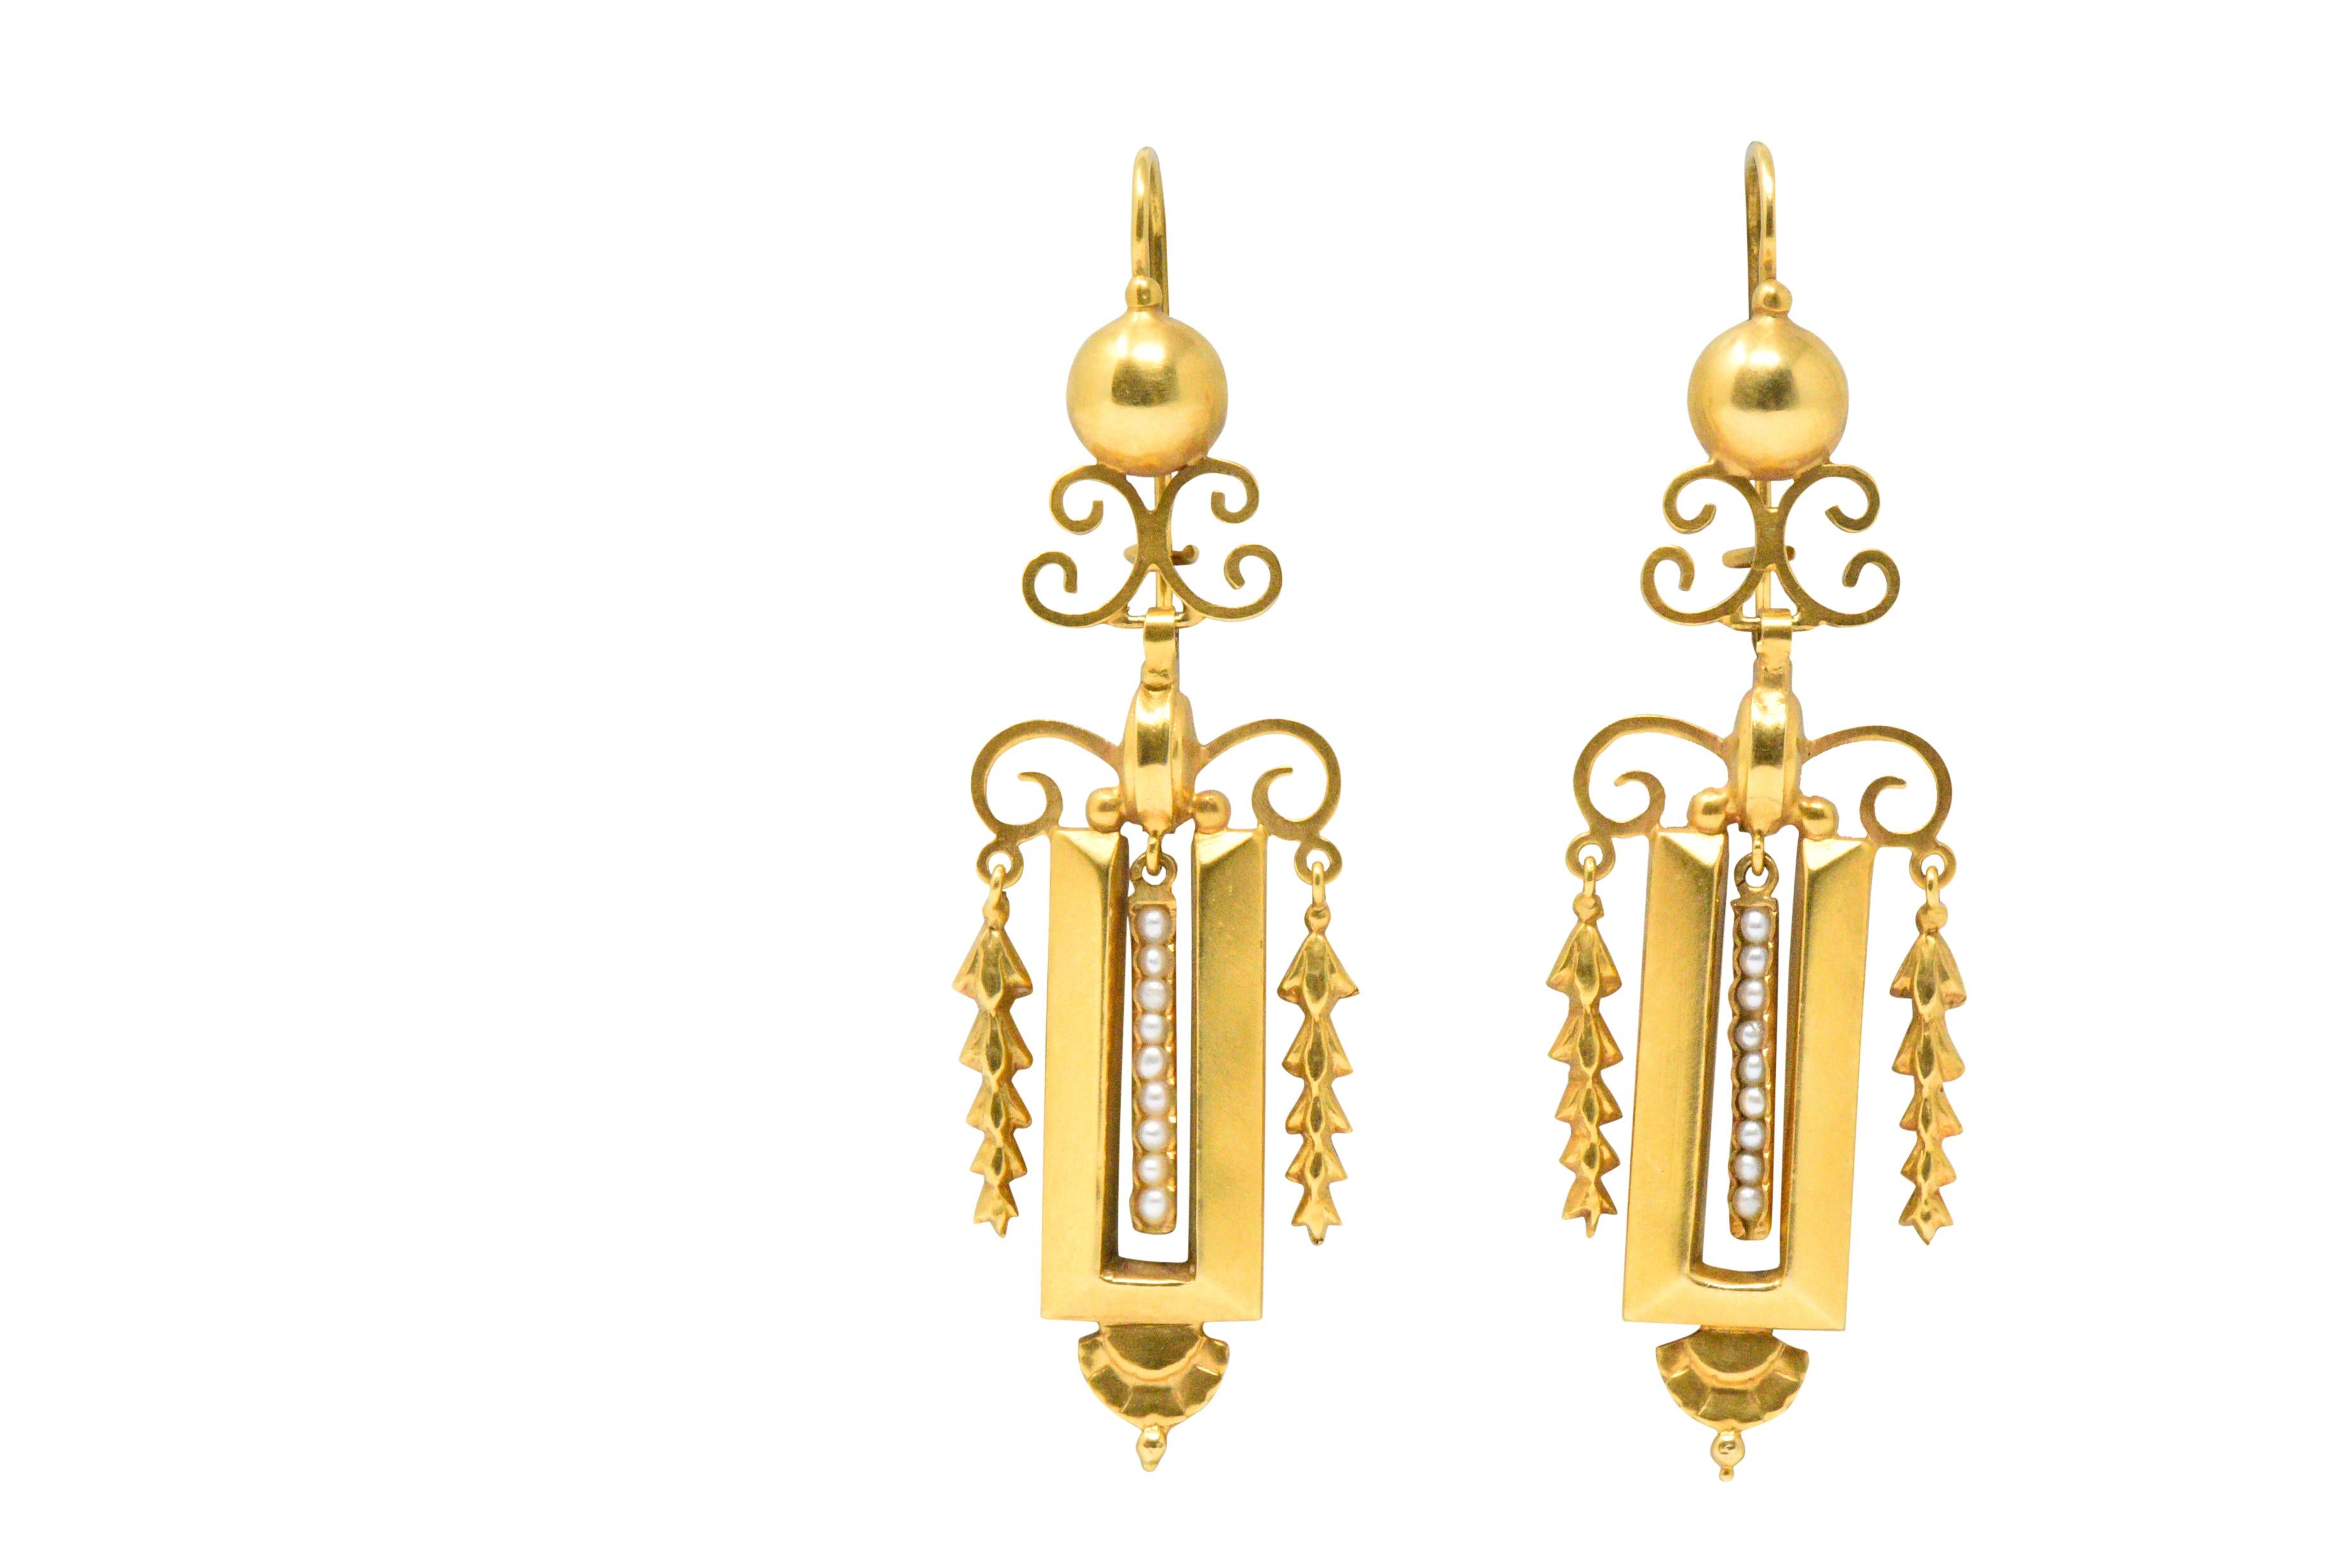 Open articulated drop earring centering delicate seed pearls

With scrolling, detailed and polished gold details

In the warm soft look of gold that you get from Victorian gold pieces

From the late romantic period of the Victorian era, circa